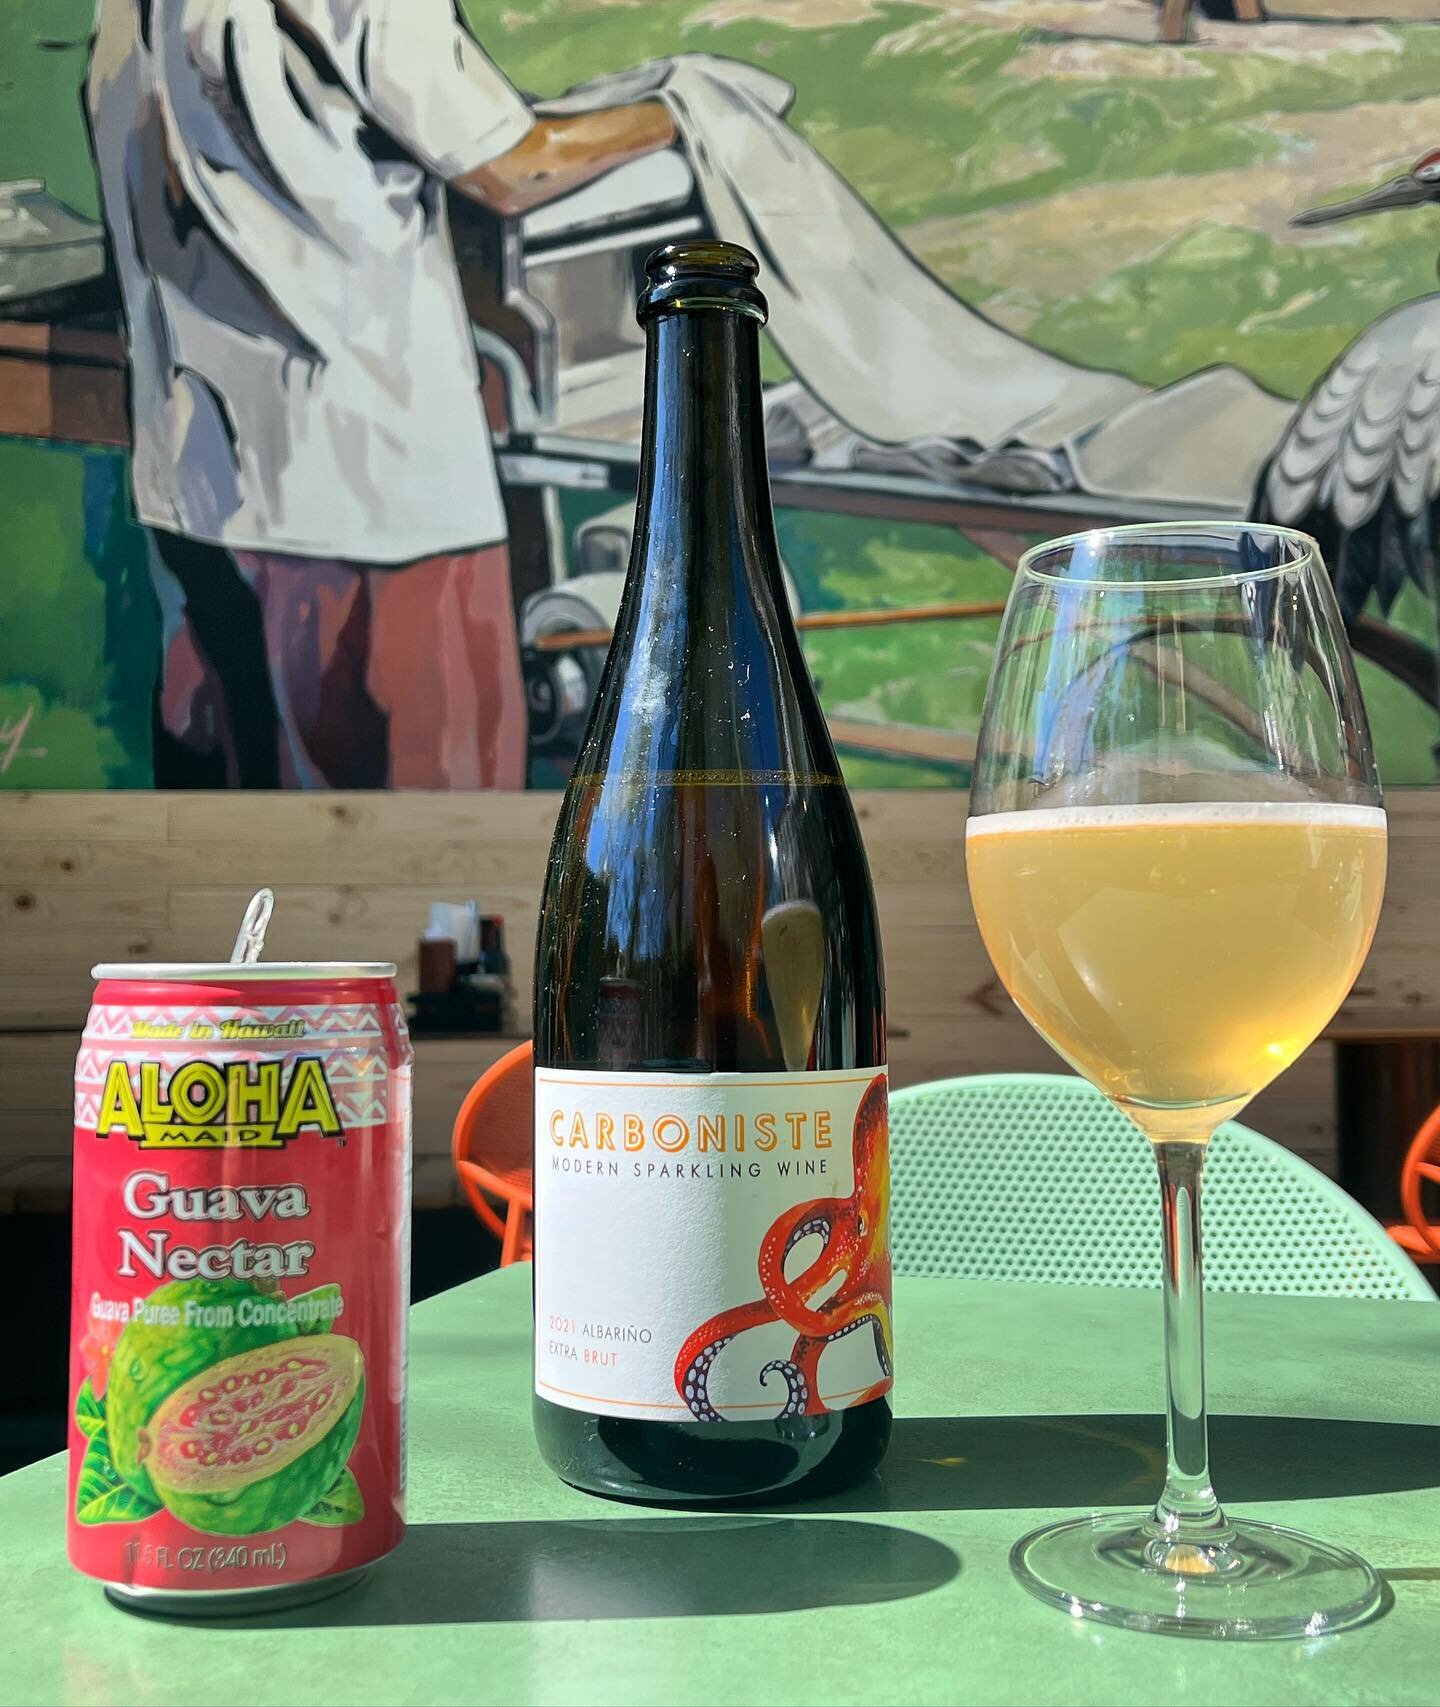 It&rsquo;s not technically on the menu, but a staff fave over at DTLA is the &lsquo;Guava-mosa&rsquo; - just pair some @carbonistewine Sparkling Albari&ntilde;o with a splash of guava juice and your weekend just got a lot more ~tropical~